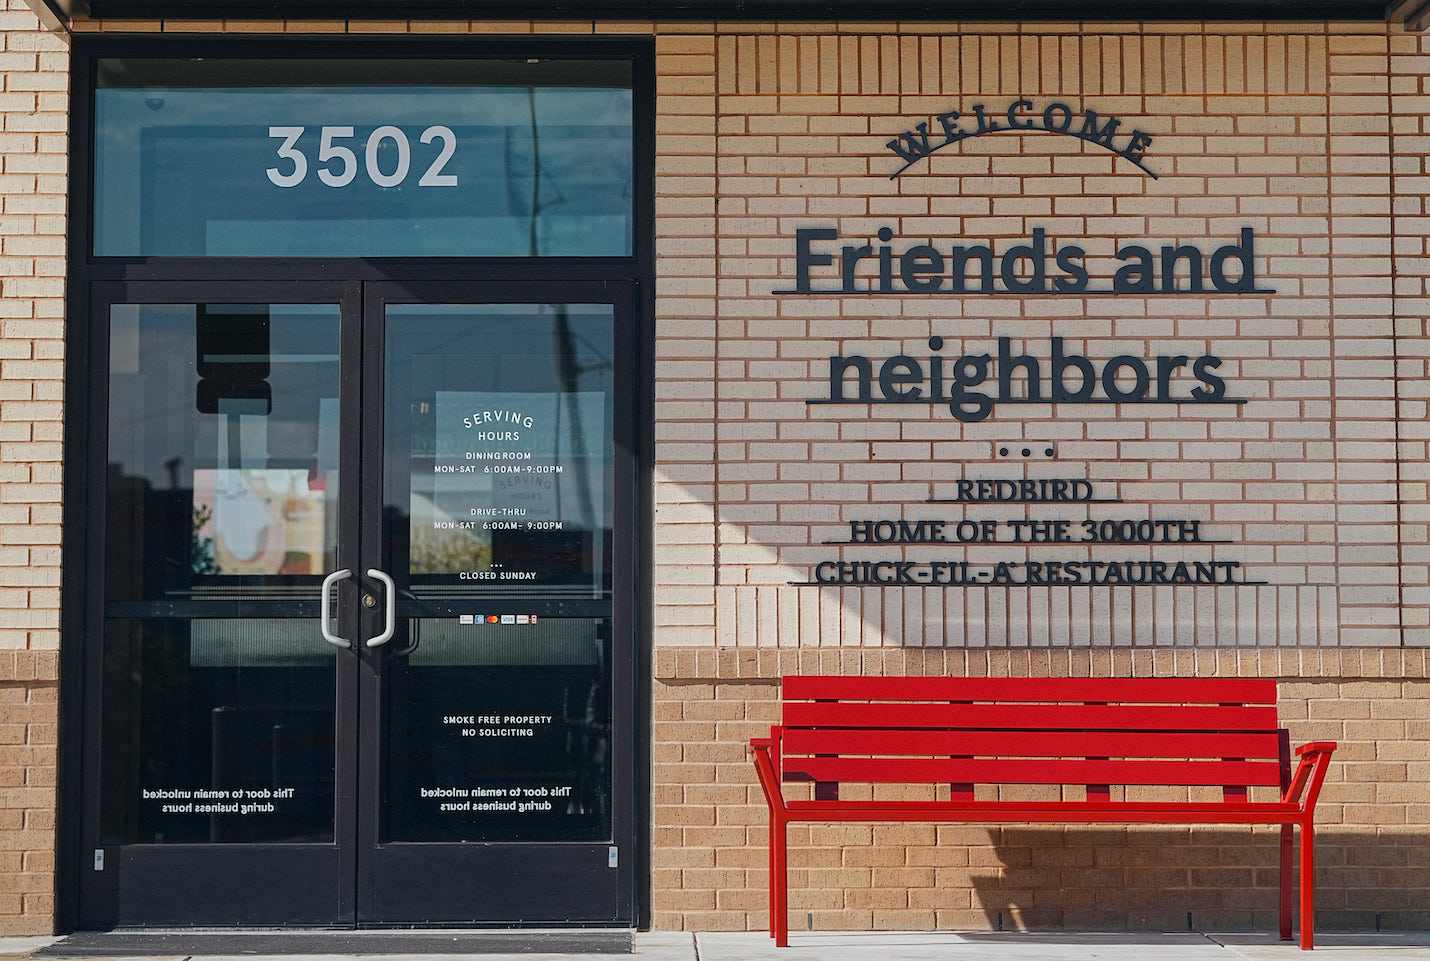 The exterior of Chick-fil-A RedBird featuring a red bench and writing on the restaurant wall that reads, "Welcome friends and neighbors. RedBird Home of the 3000th Chick-fil-A Restaurant".